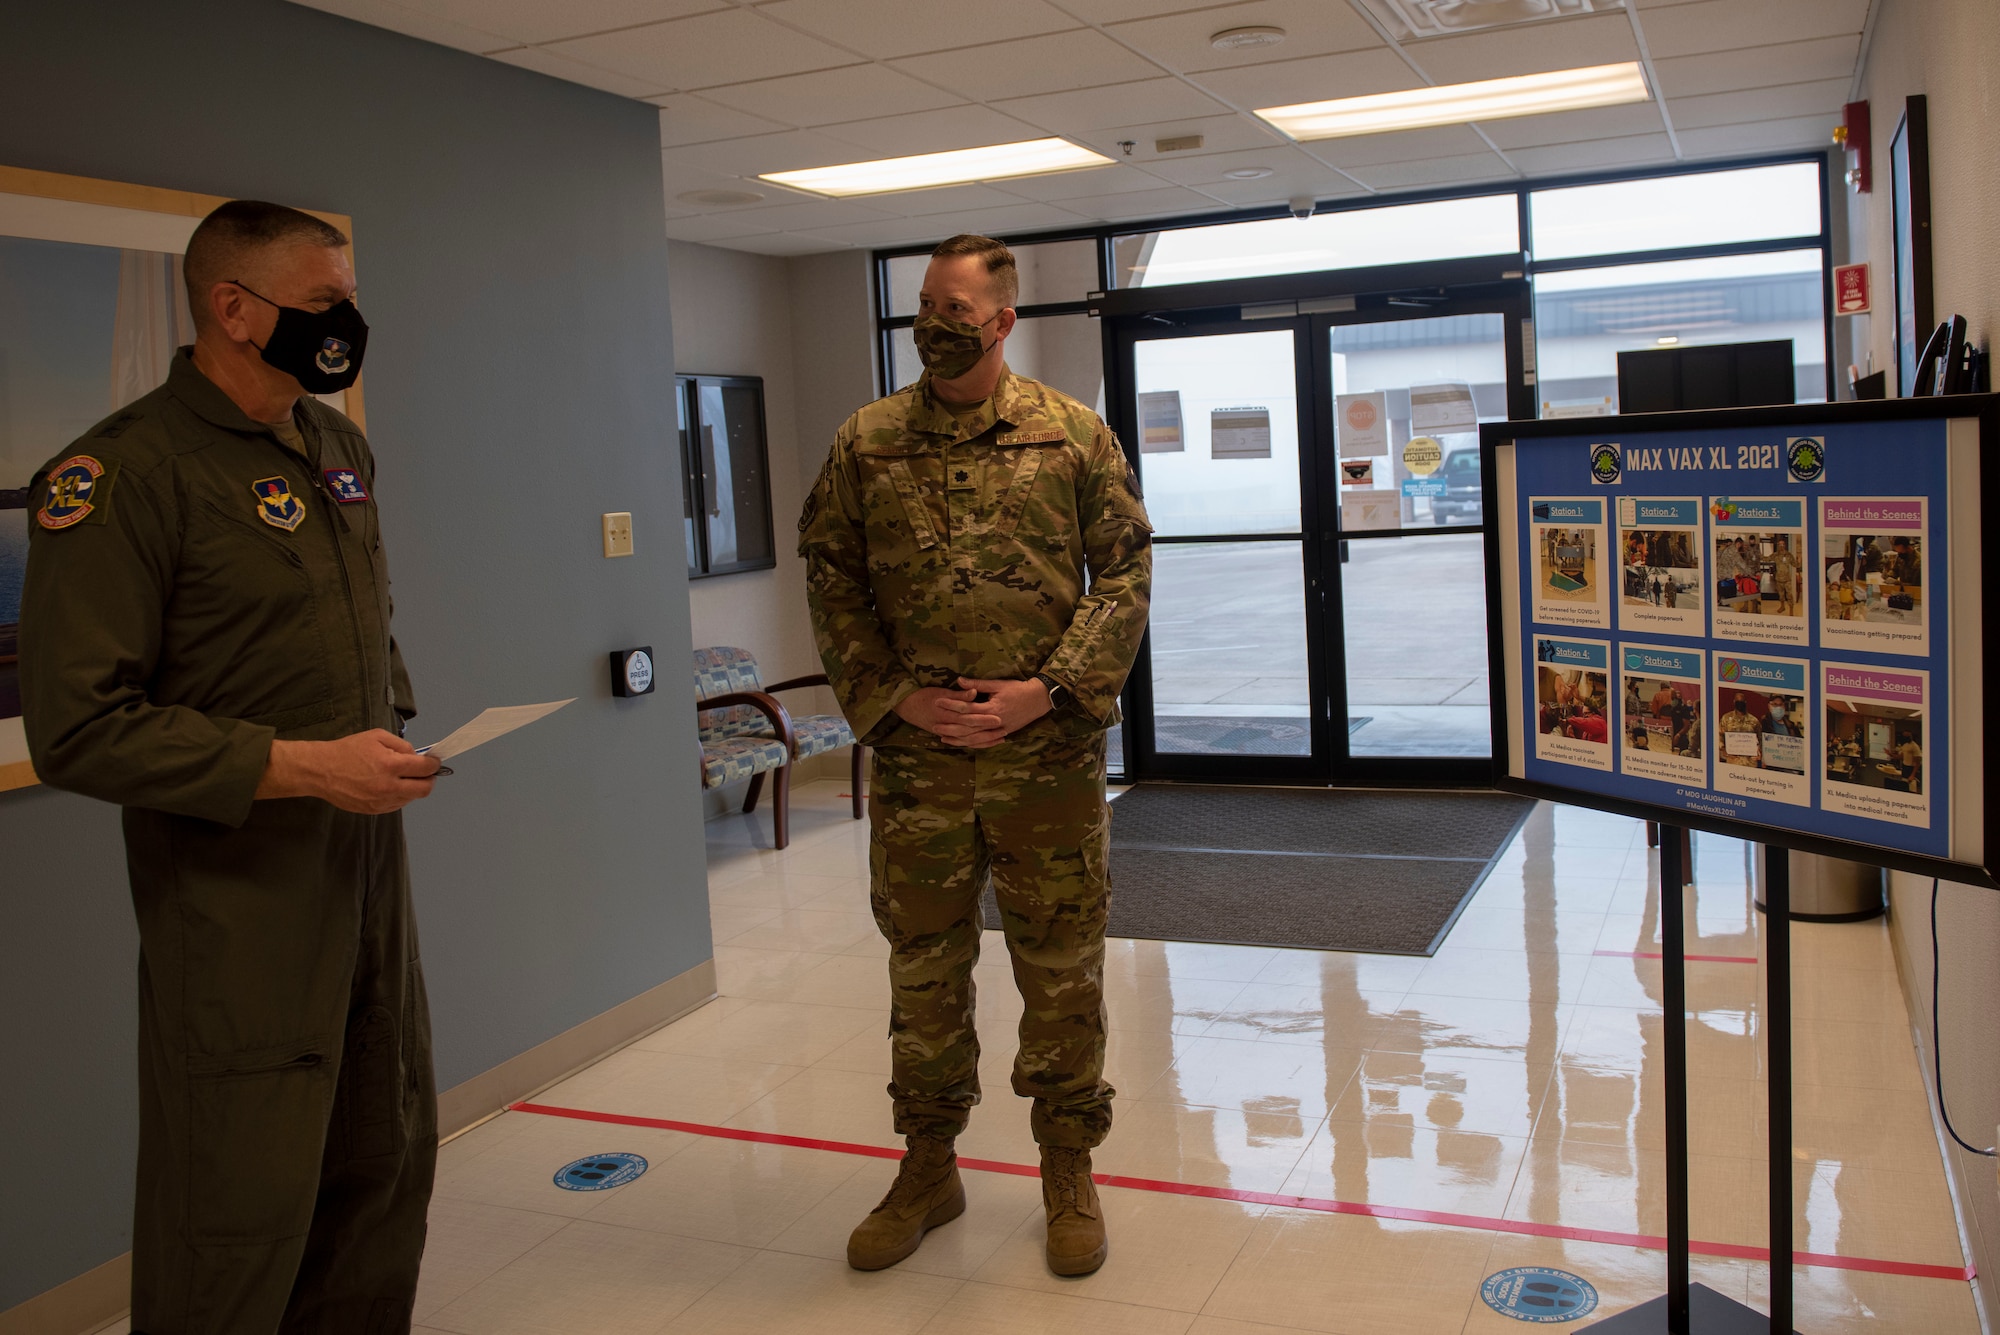 Lt. Col. Jonathan Semple, 47th Medical Group administrator, briefs Maj. Gen. William Spangenthal, Air Education and Training Command deputy commander, during his tour of the 47th Medical Group at Laughlin Air Force Base, Texas, Feb. 9, 2021. Semple explained how the Team XL MAX VAX COVID-19 vaccination plan has enabled sustained operations across the installation. (U.S. Air Force photo by Airman 1st Class David Phaff)